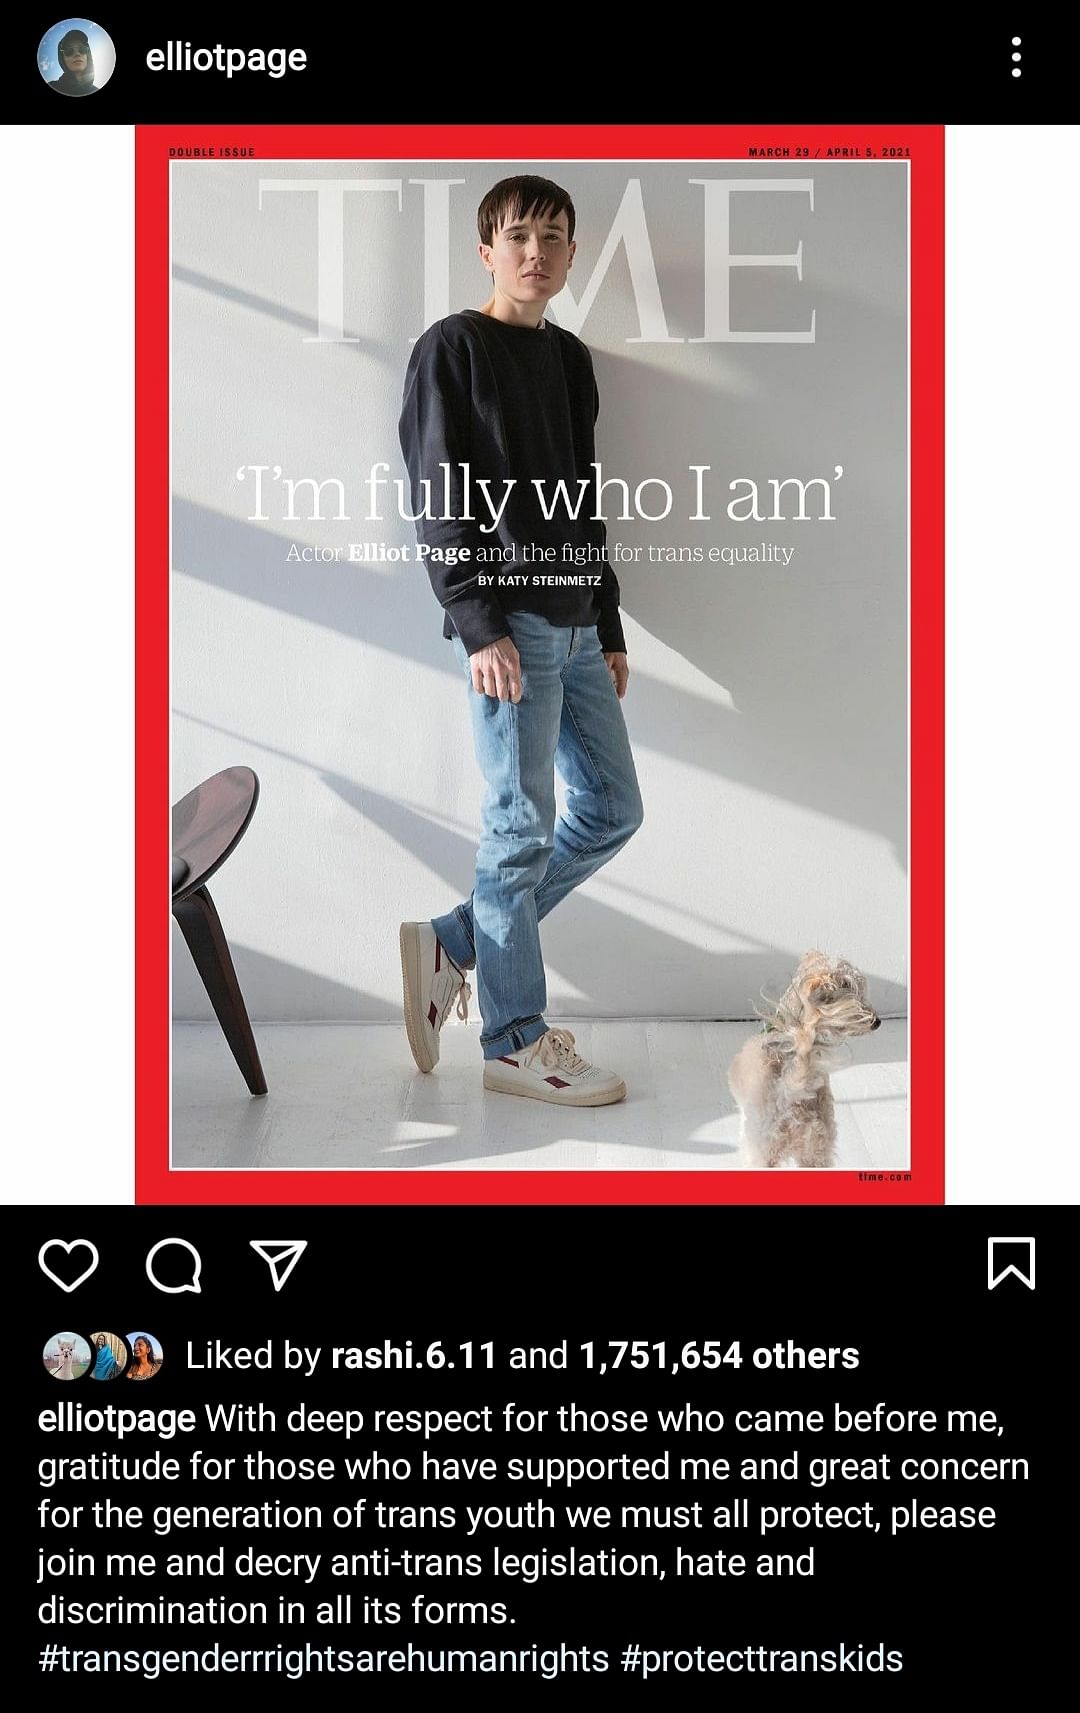 Elliot Page became the first trans man to appear on the cover of Time magazine. 